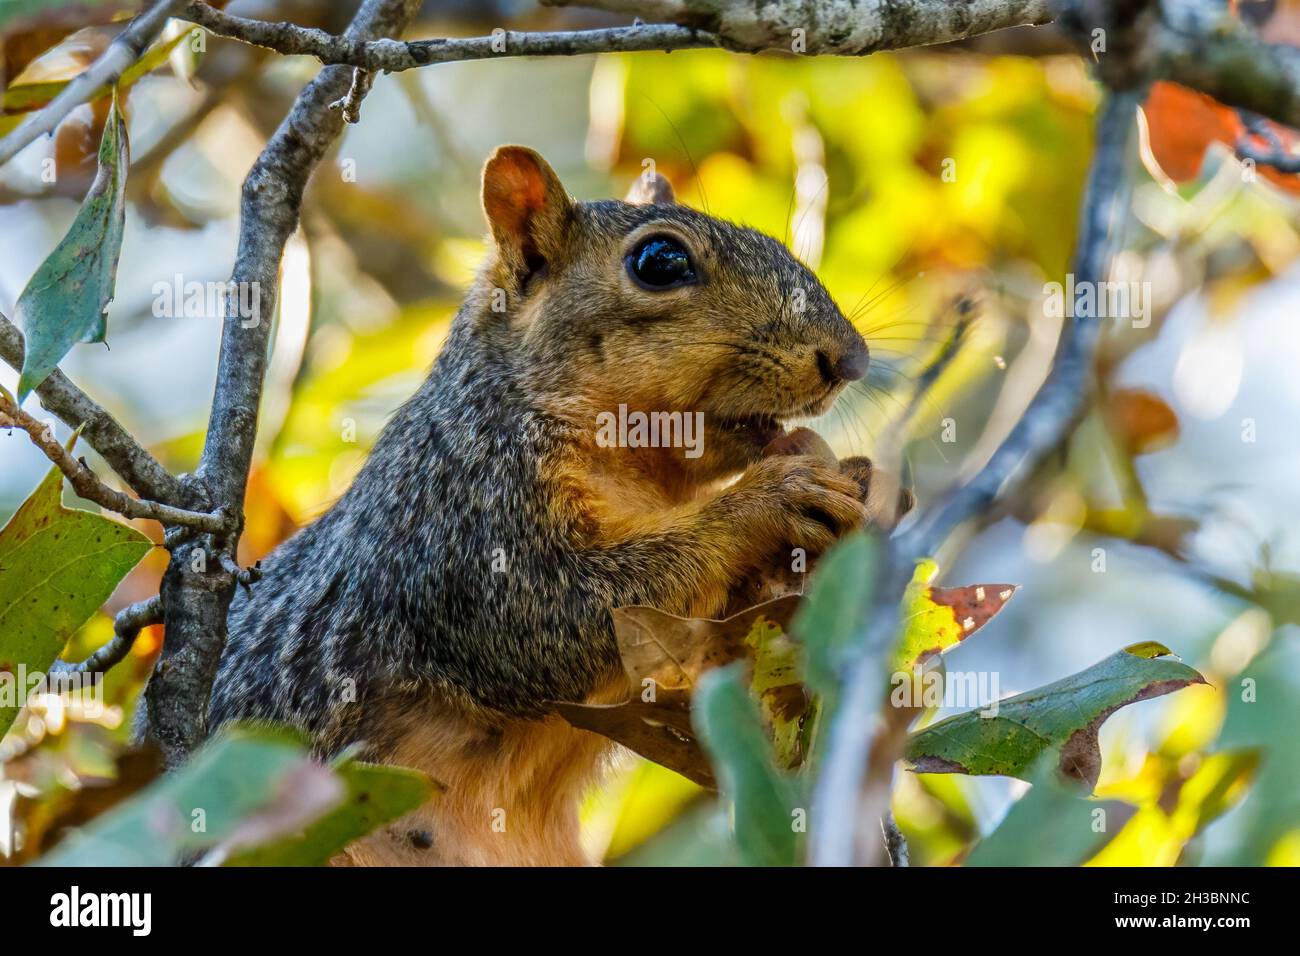 Squirrel eating a nut. Stock Photo